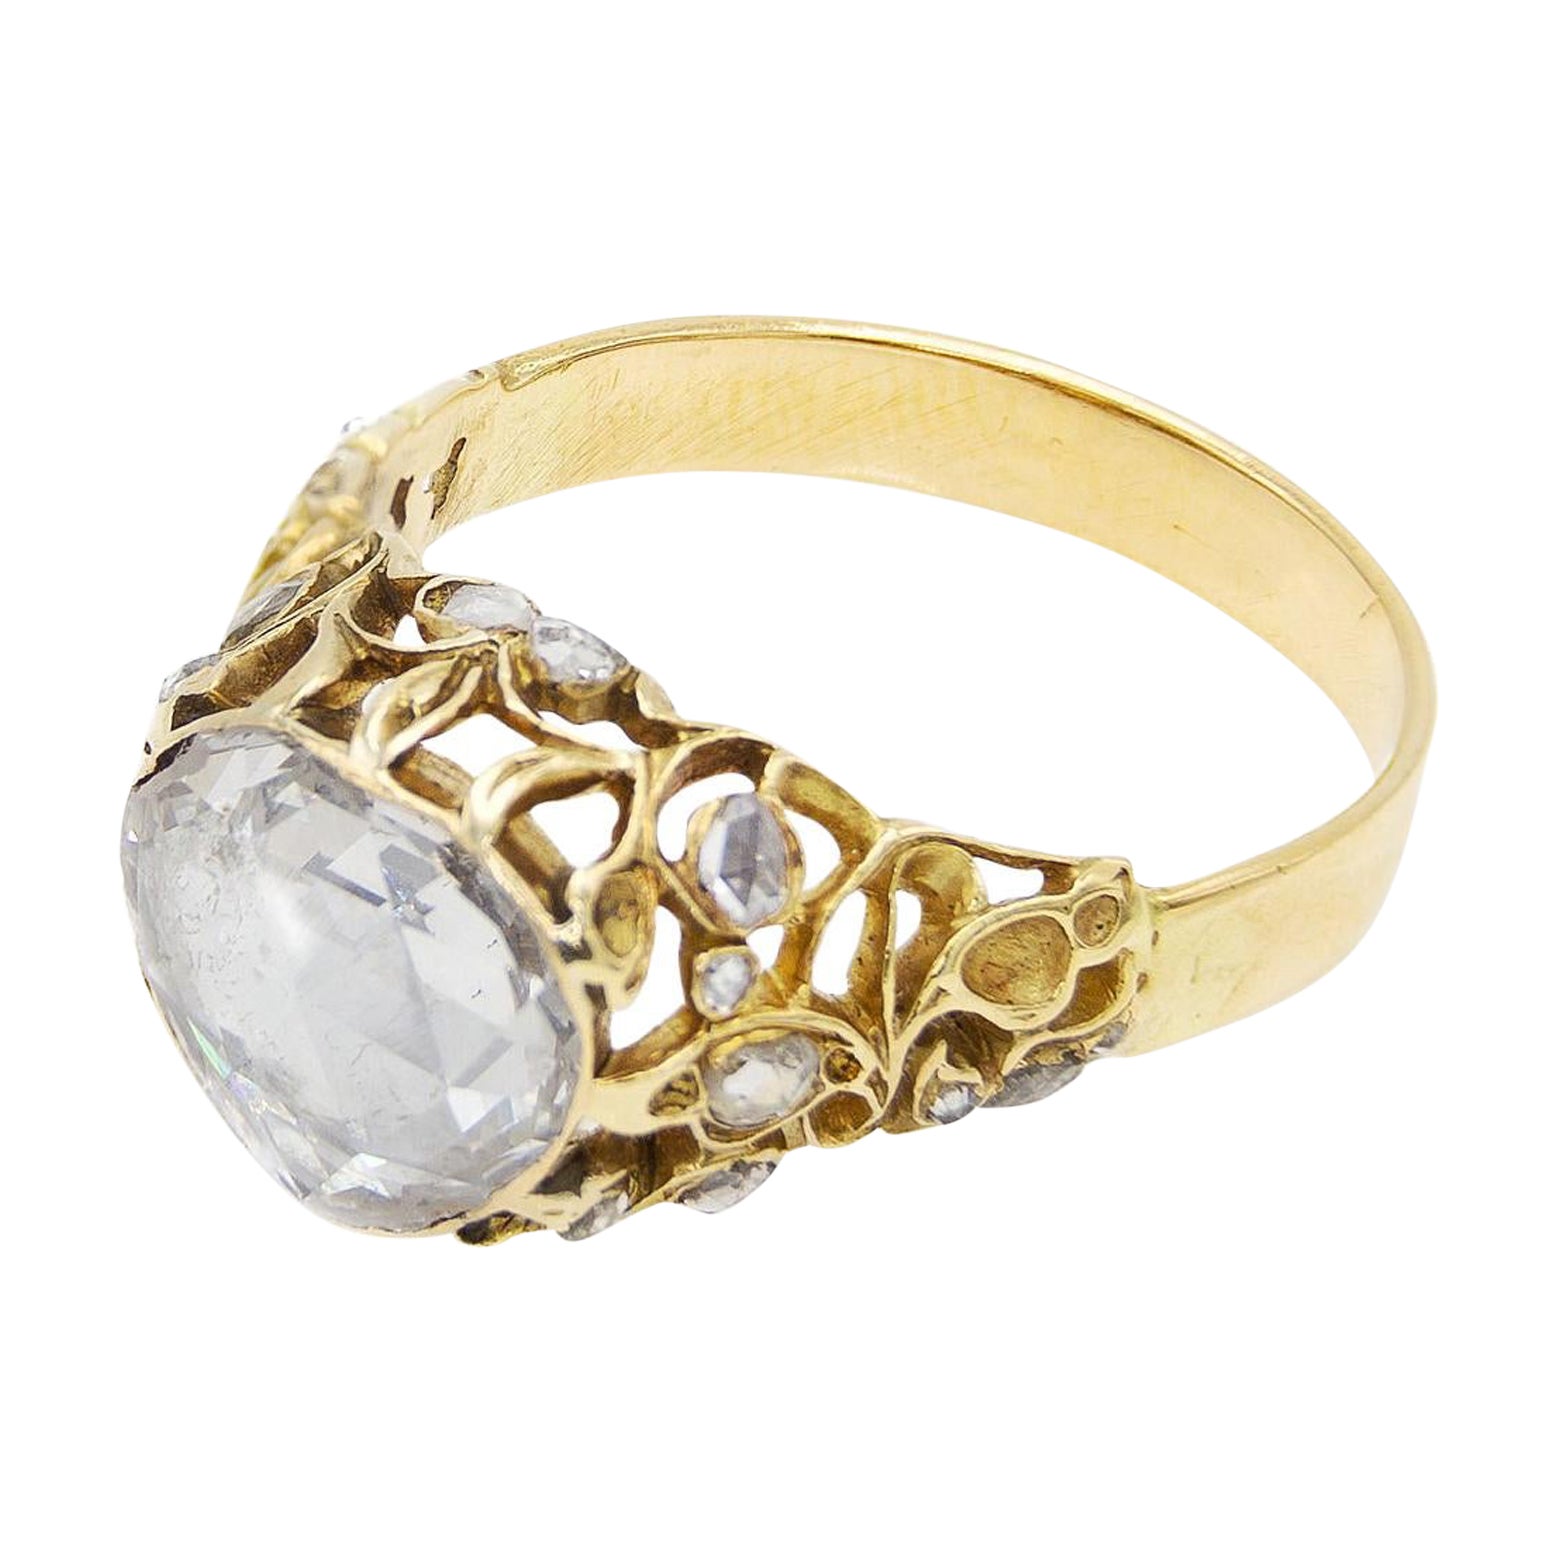 French Victorian 2.7 Carat Rose Cut Diamond Ring  in 18 Karat Yellow Gold For Sale